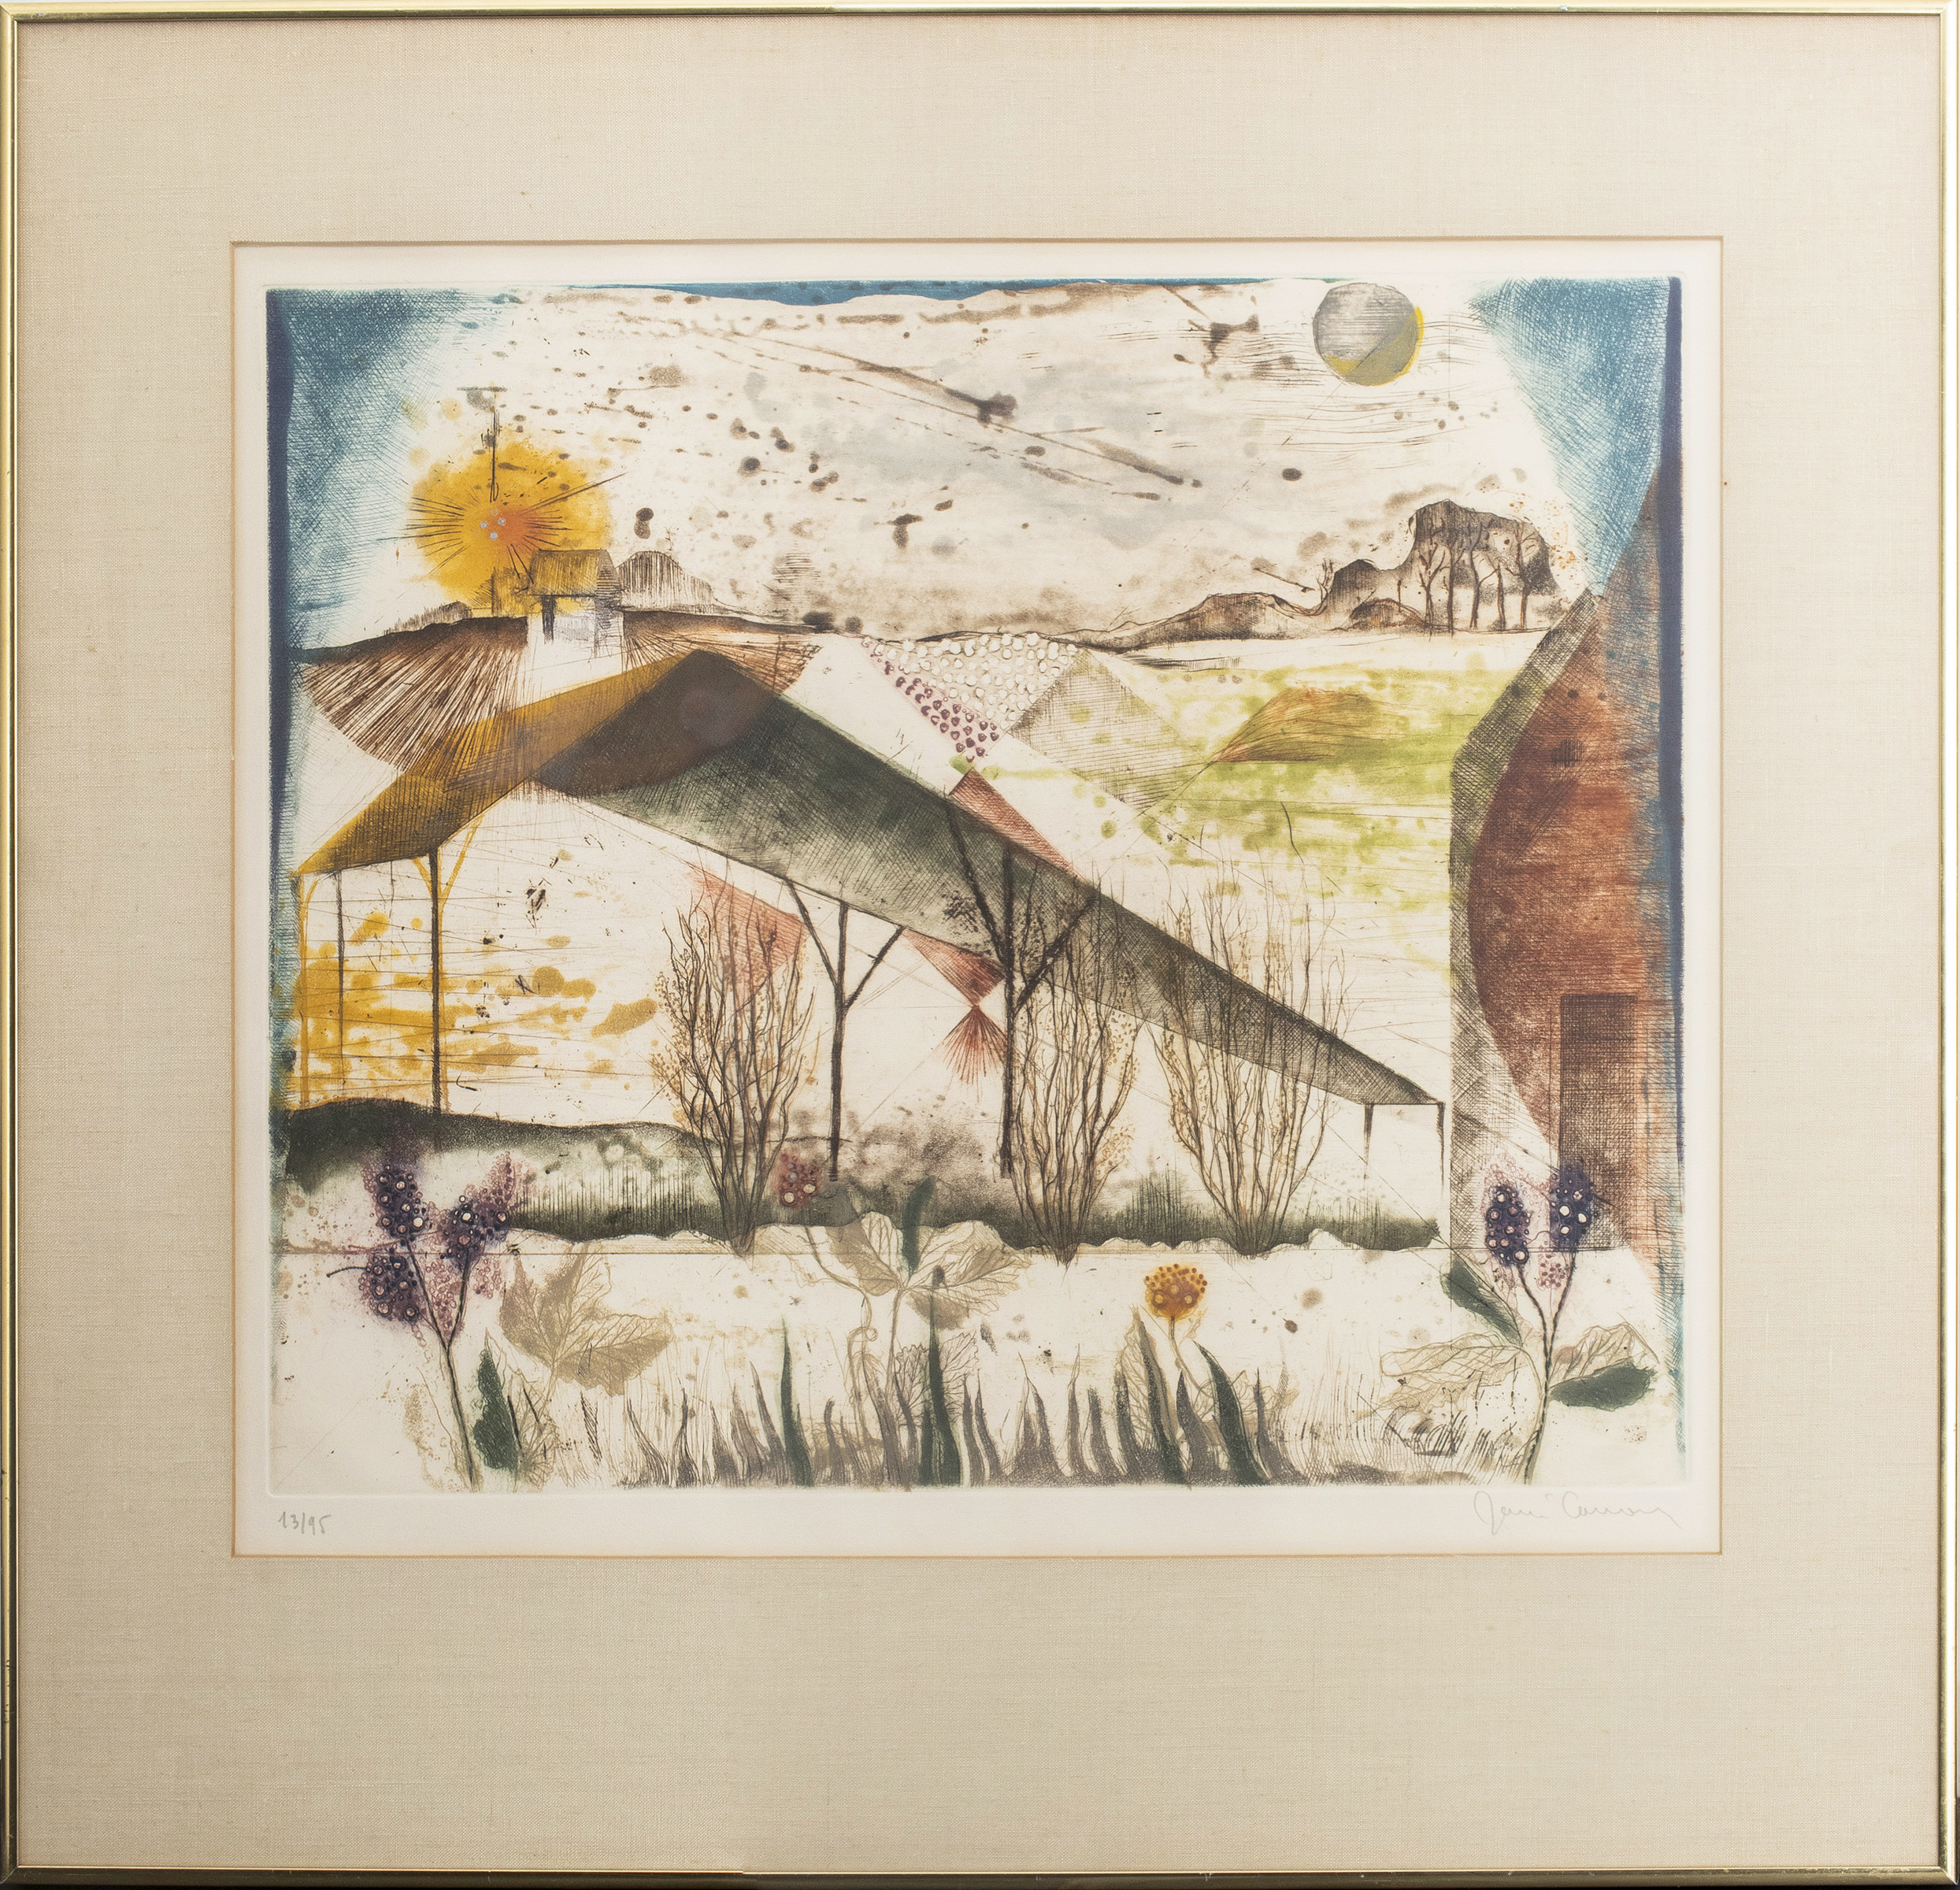 RENE CARCAN "LANDSCAPE" ETCHING